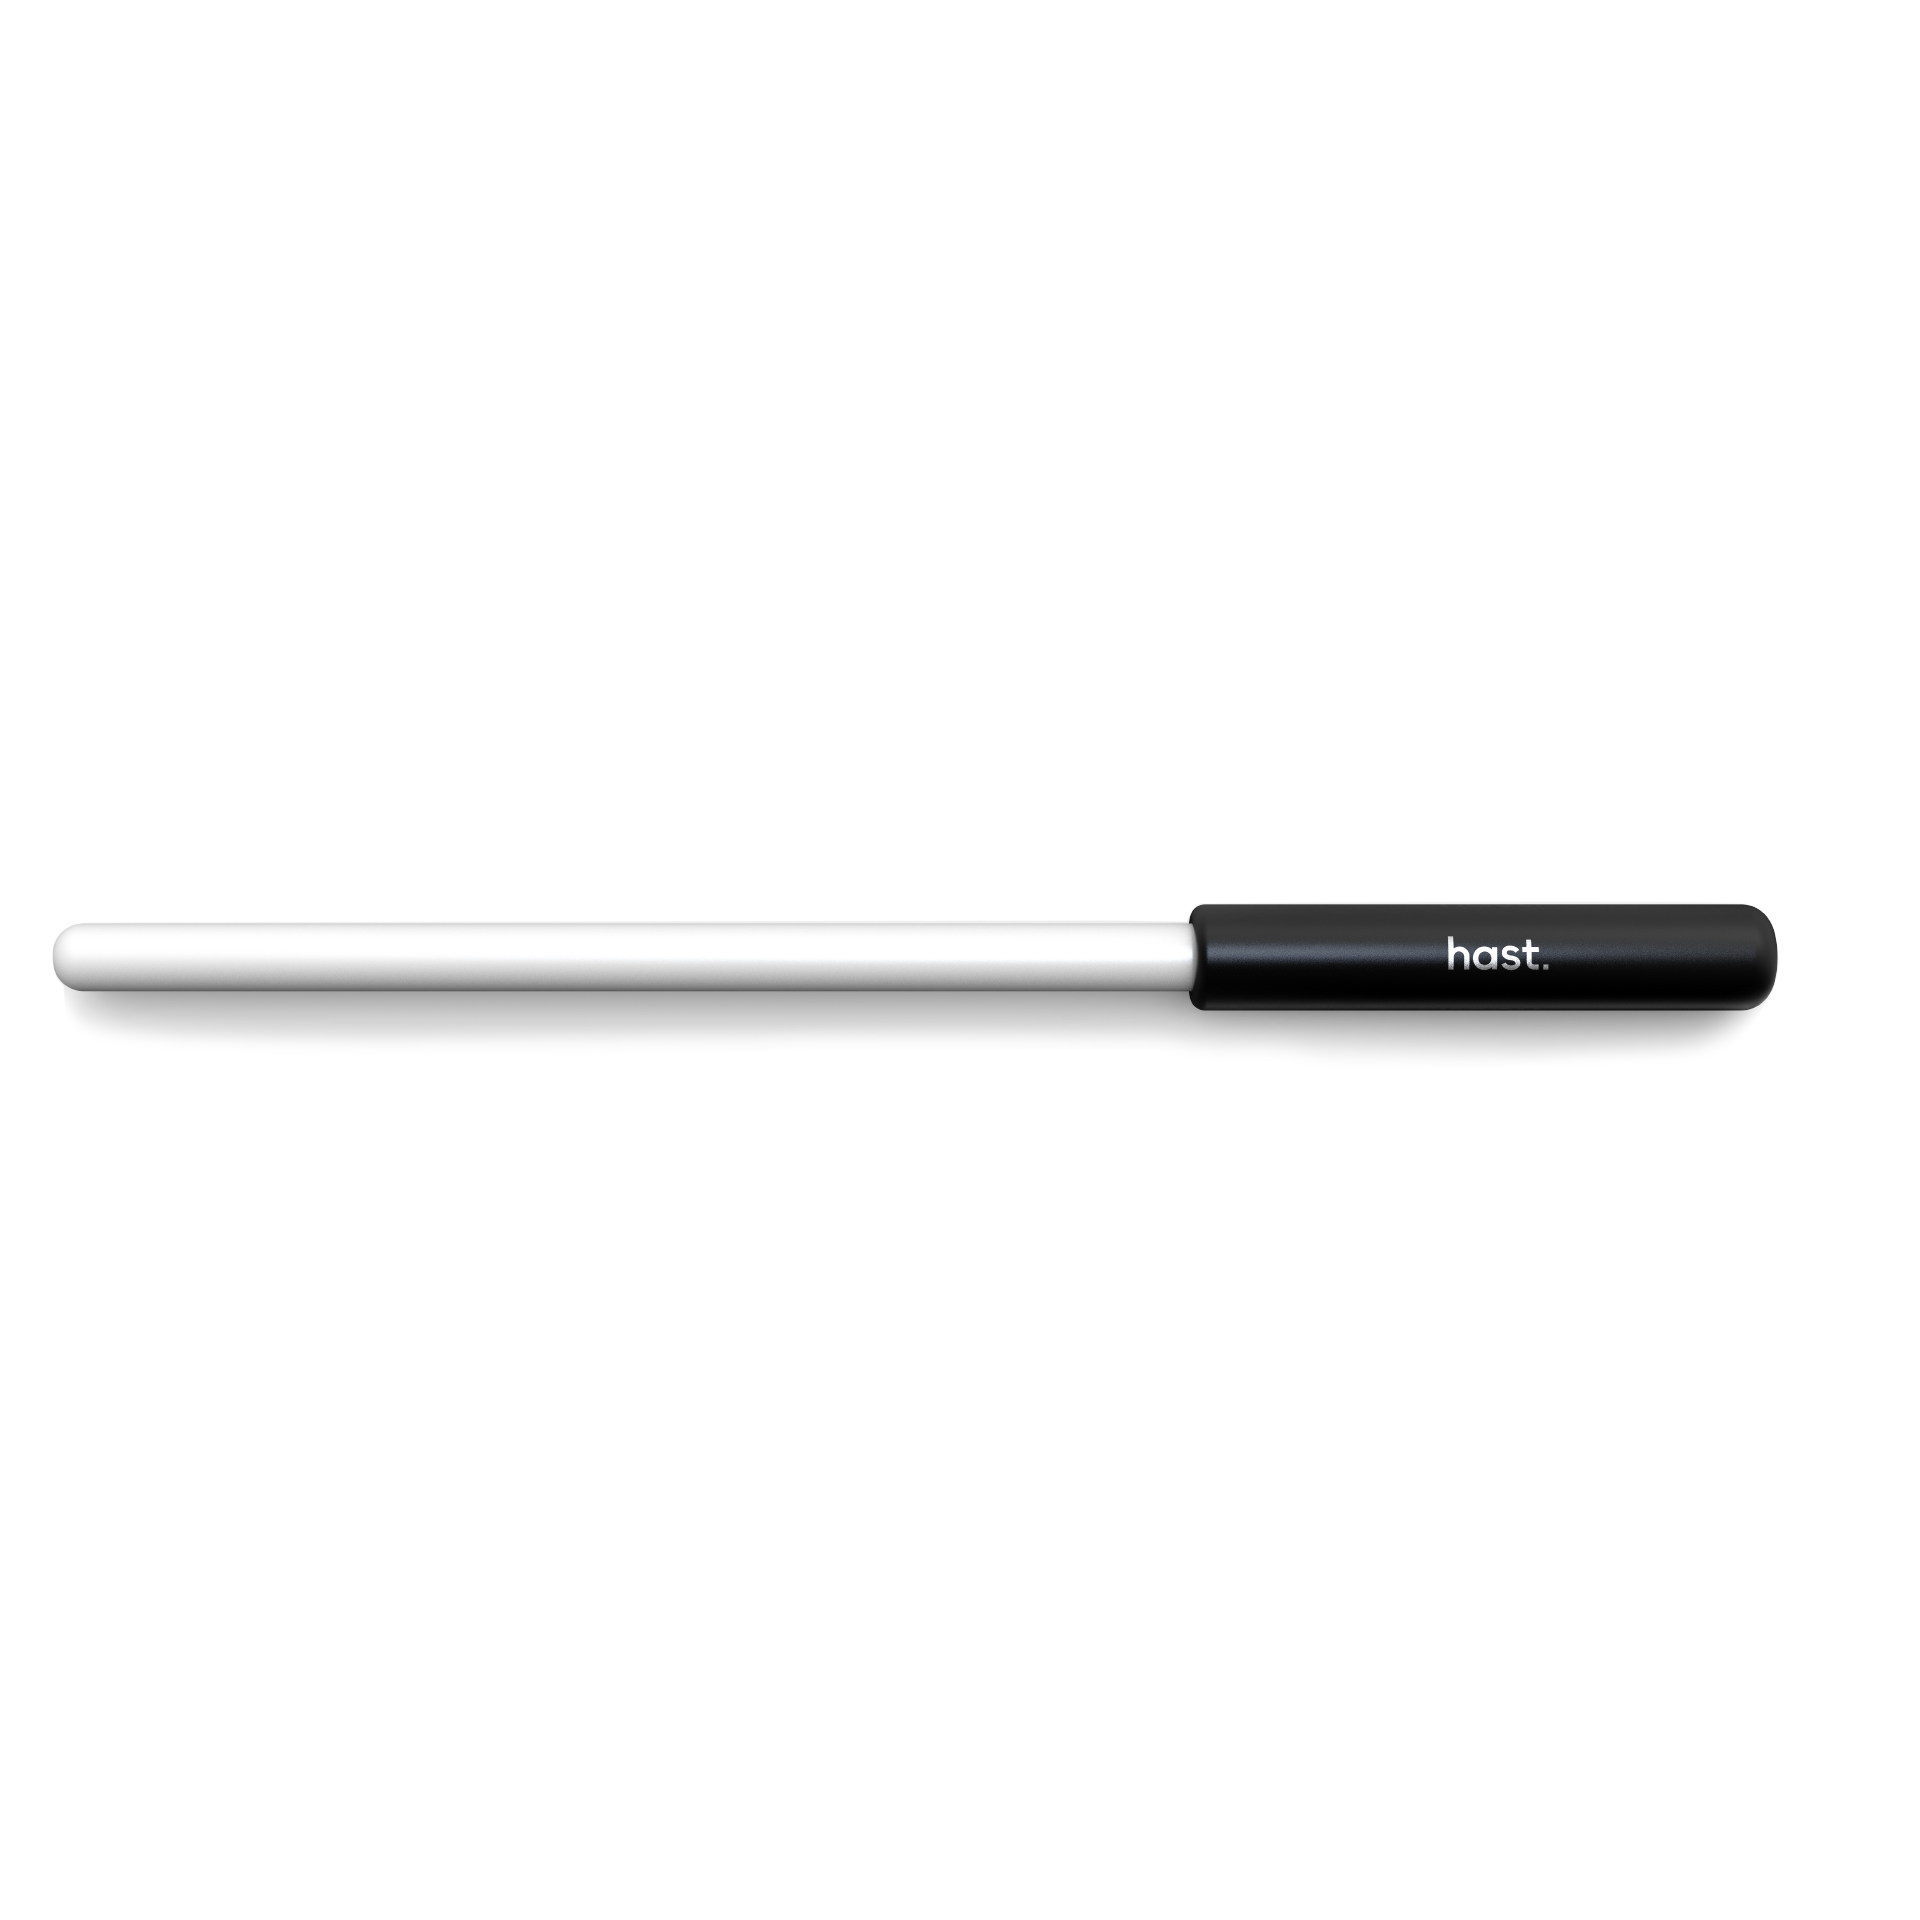 Risam Kitchen-Ceramic sharpening rod 10 inch for home use